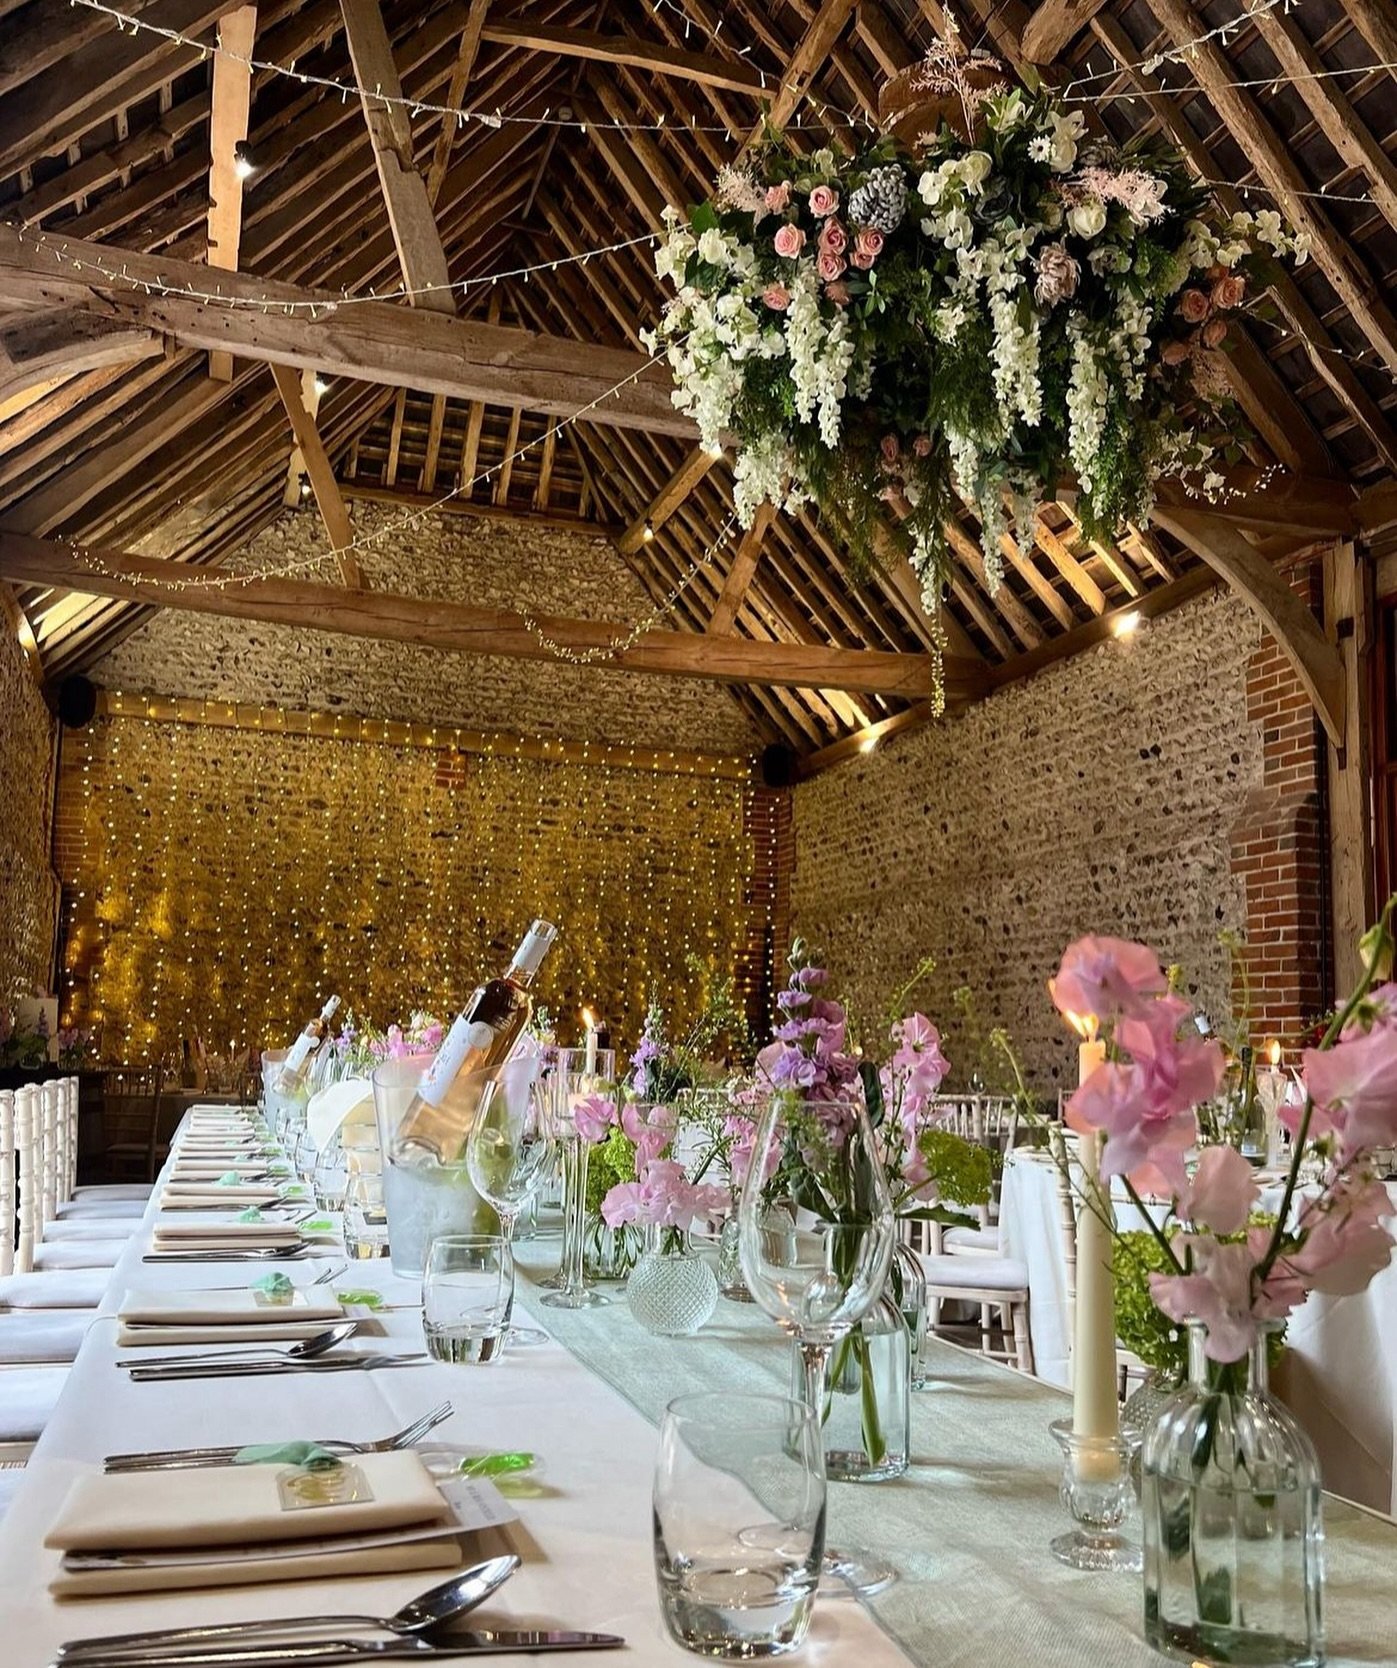 One of our fabulous faux floral chandeliers photo by thanks to @freshcateringevents who supplied the catering 🌿🤍 

Venue @cissbury